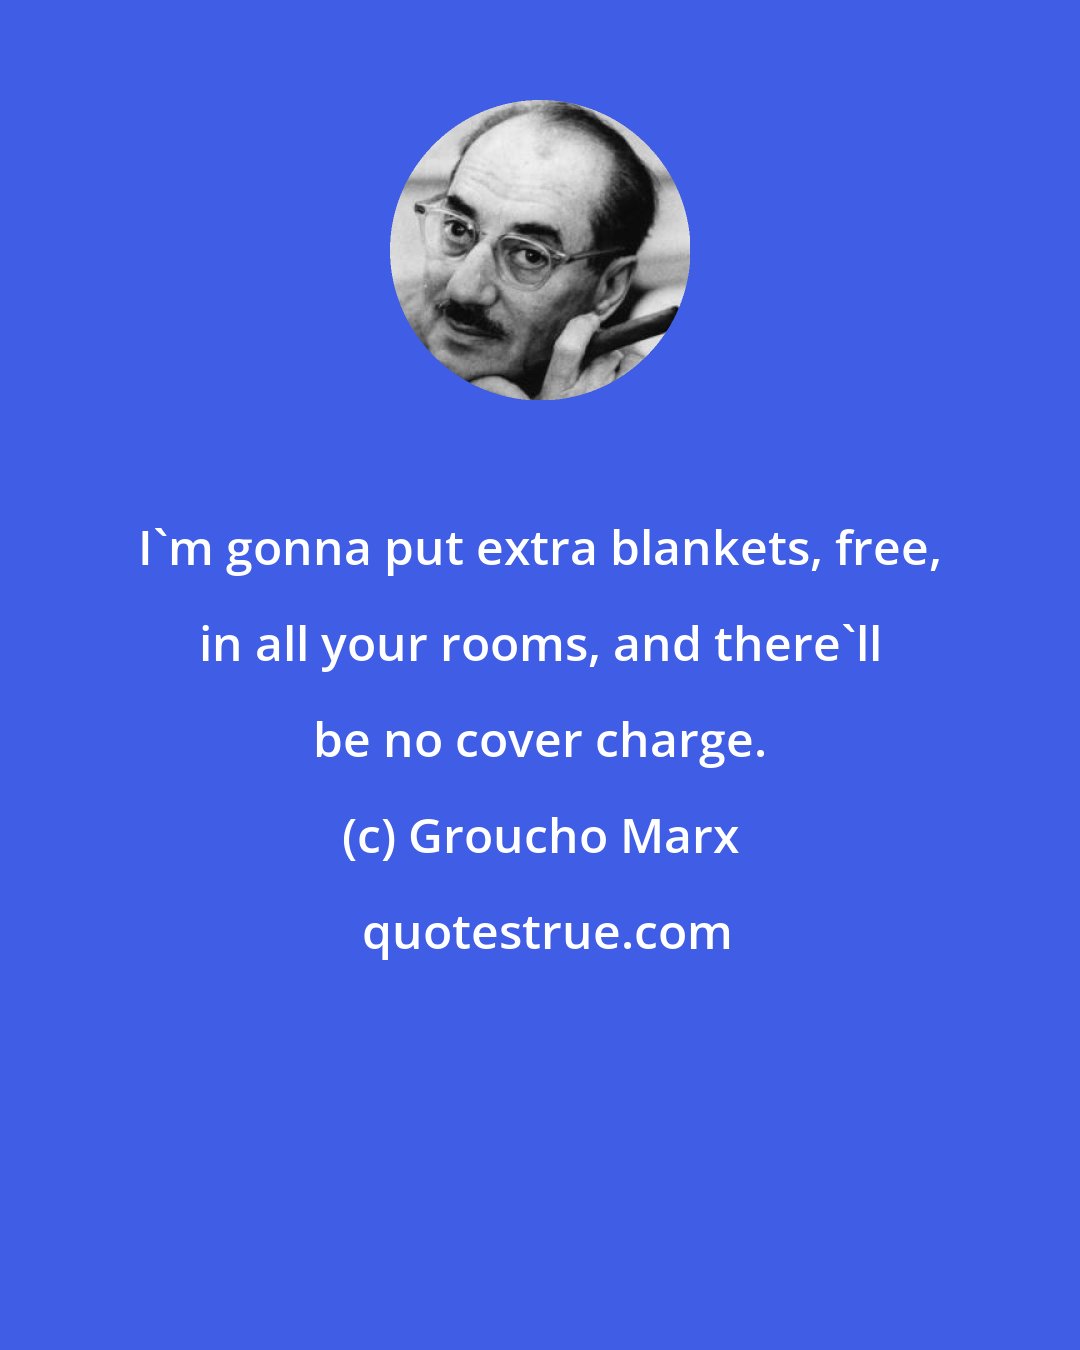 Groucho Marx: I'm gonna put extra blankets, free, in all your rooms, and there'll be no cover charge.